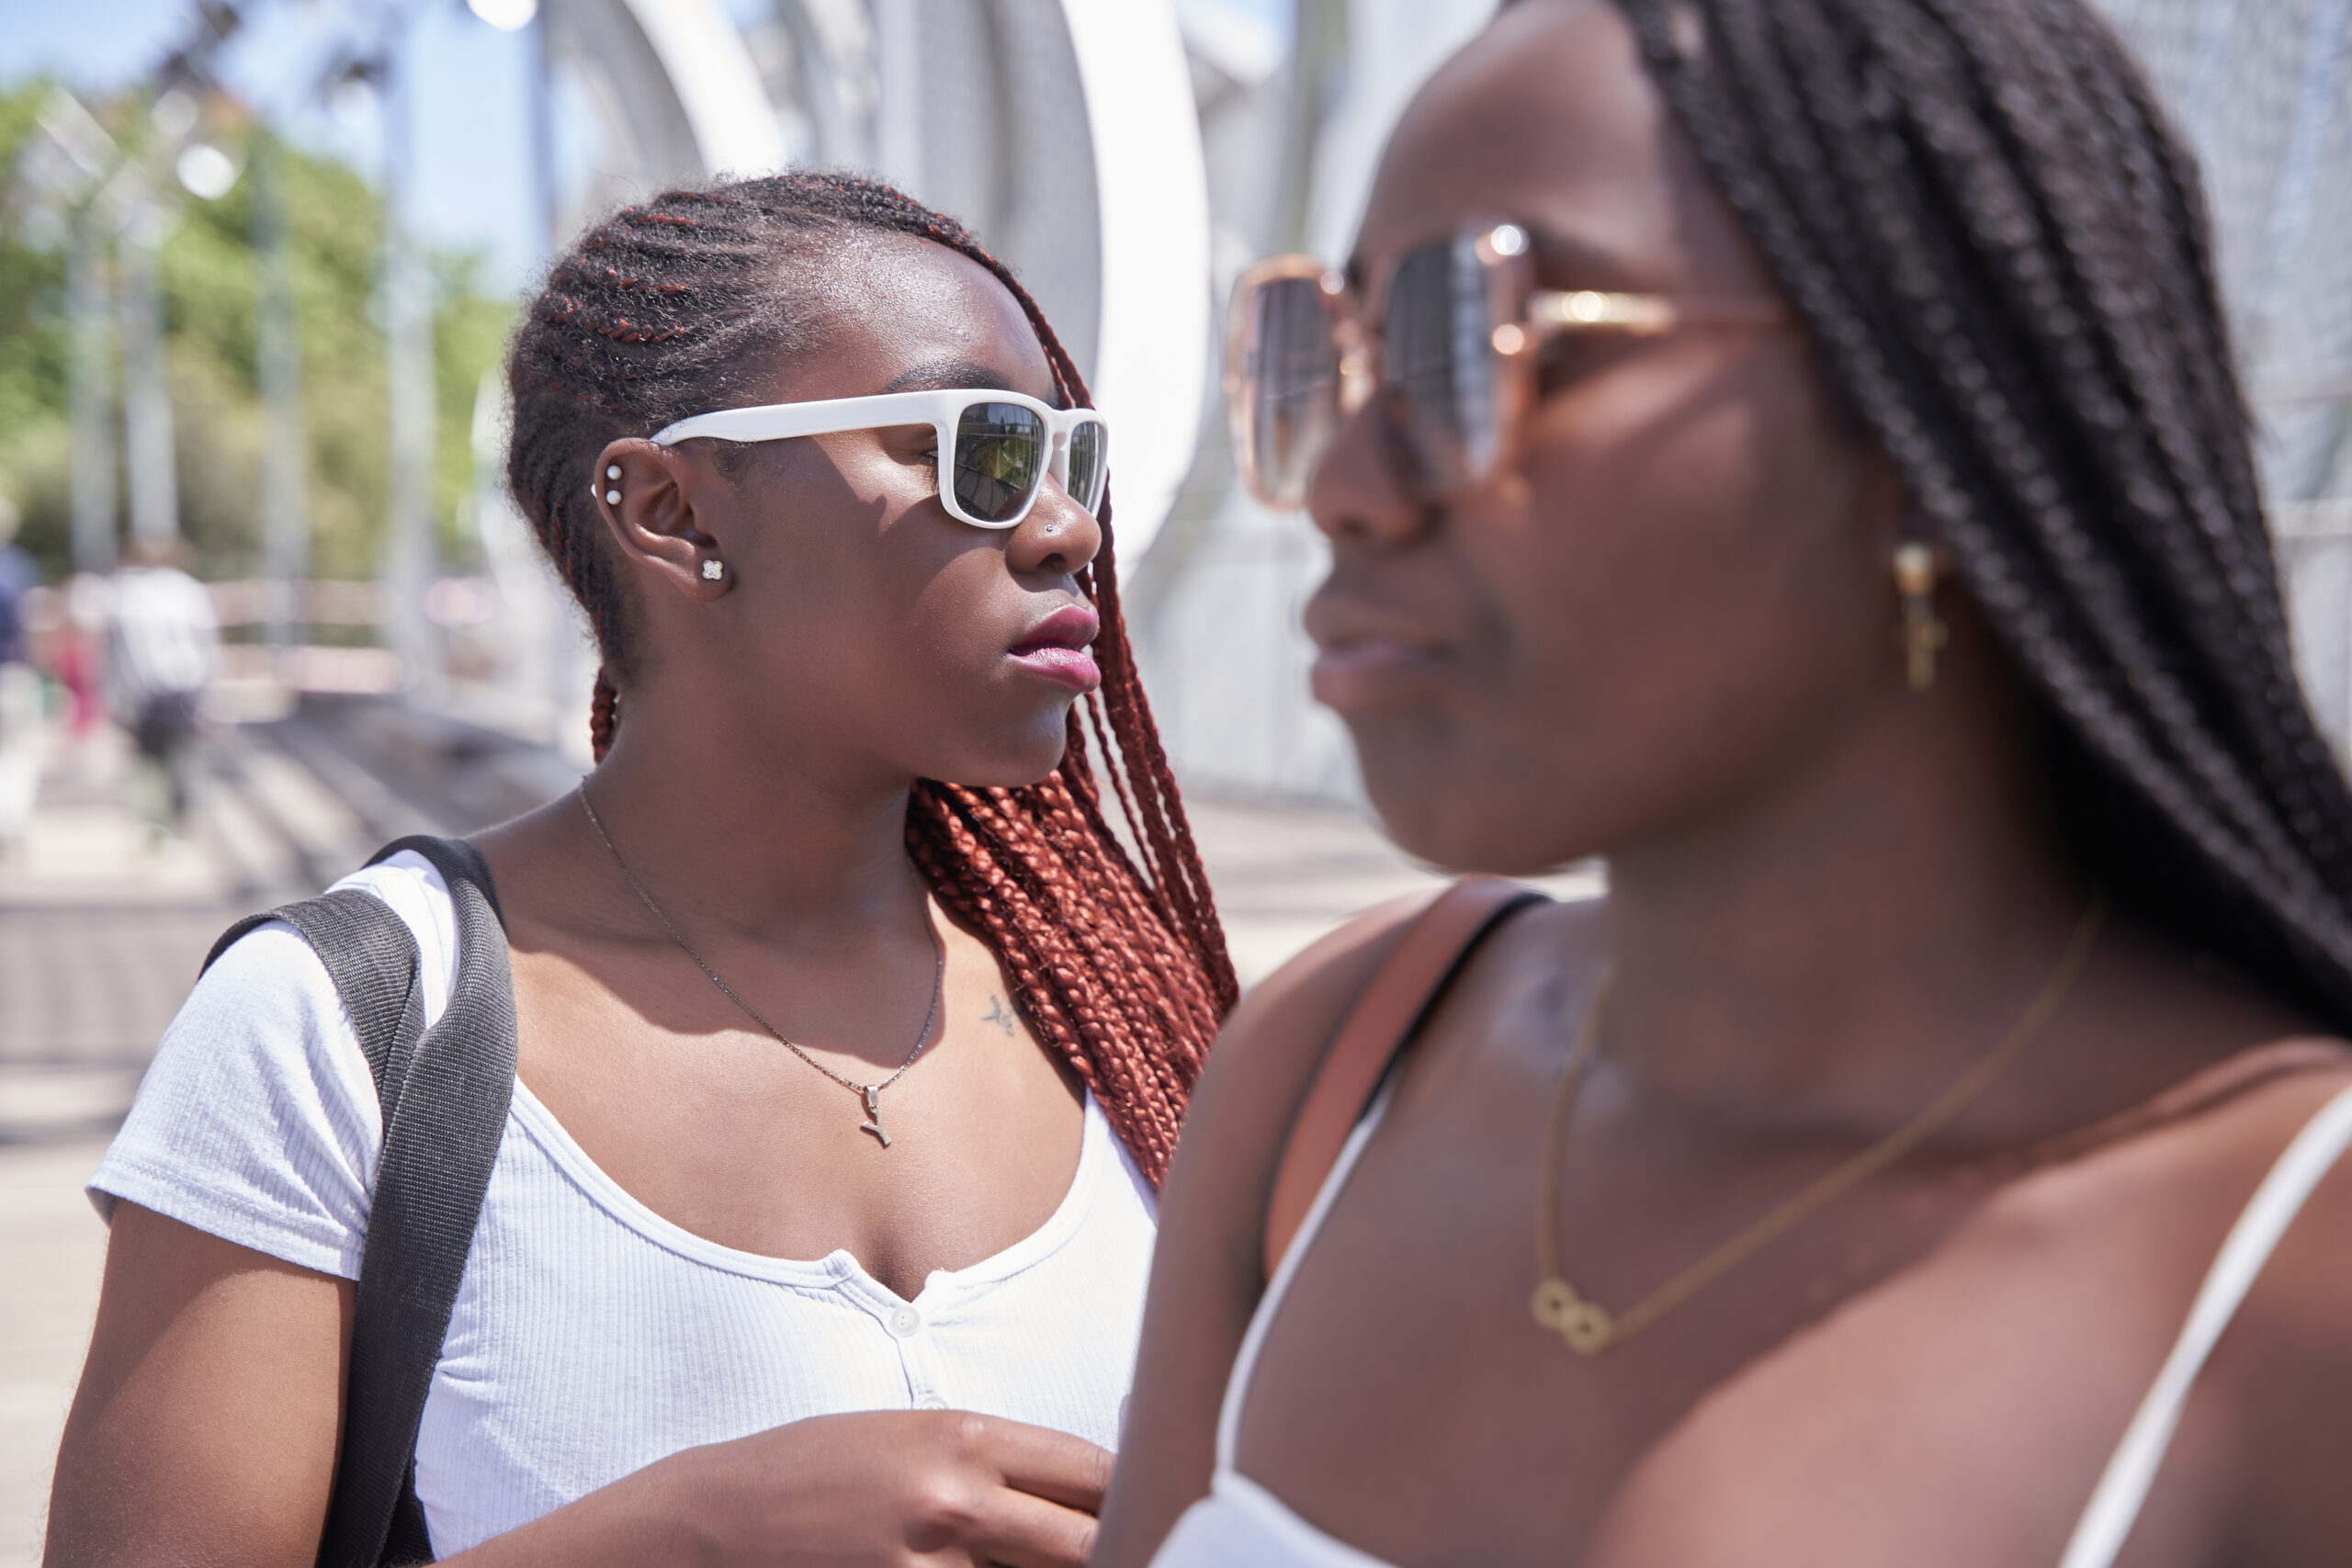 NOMADNESS Fest for Black and Brown Travelers, including LGBTQ+ People!